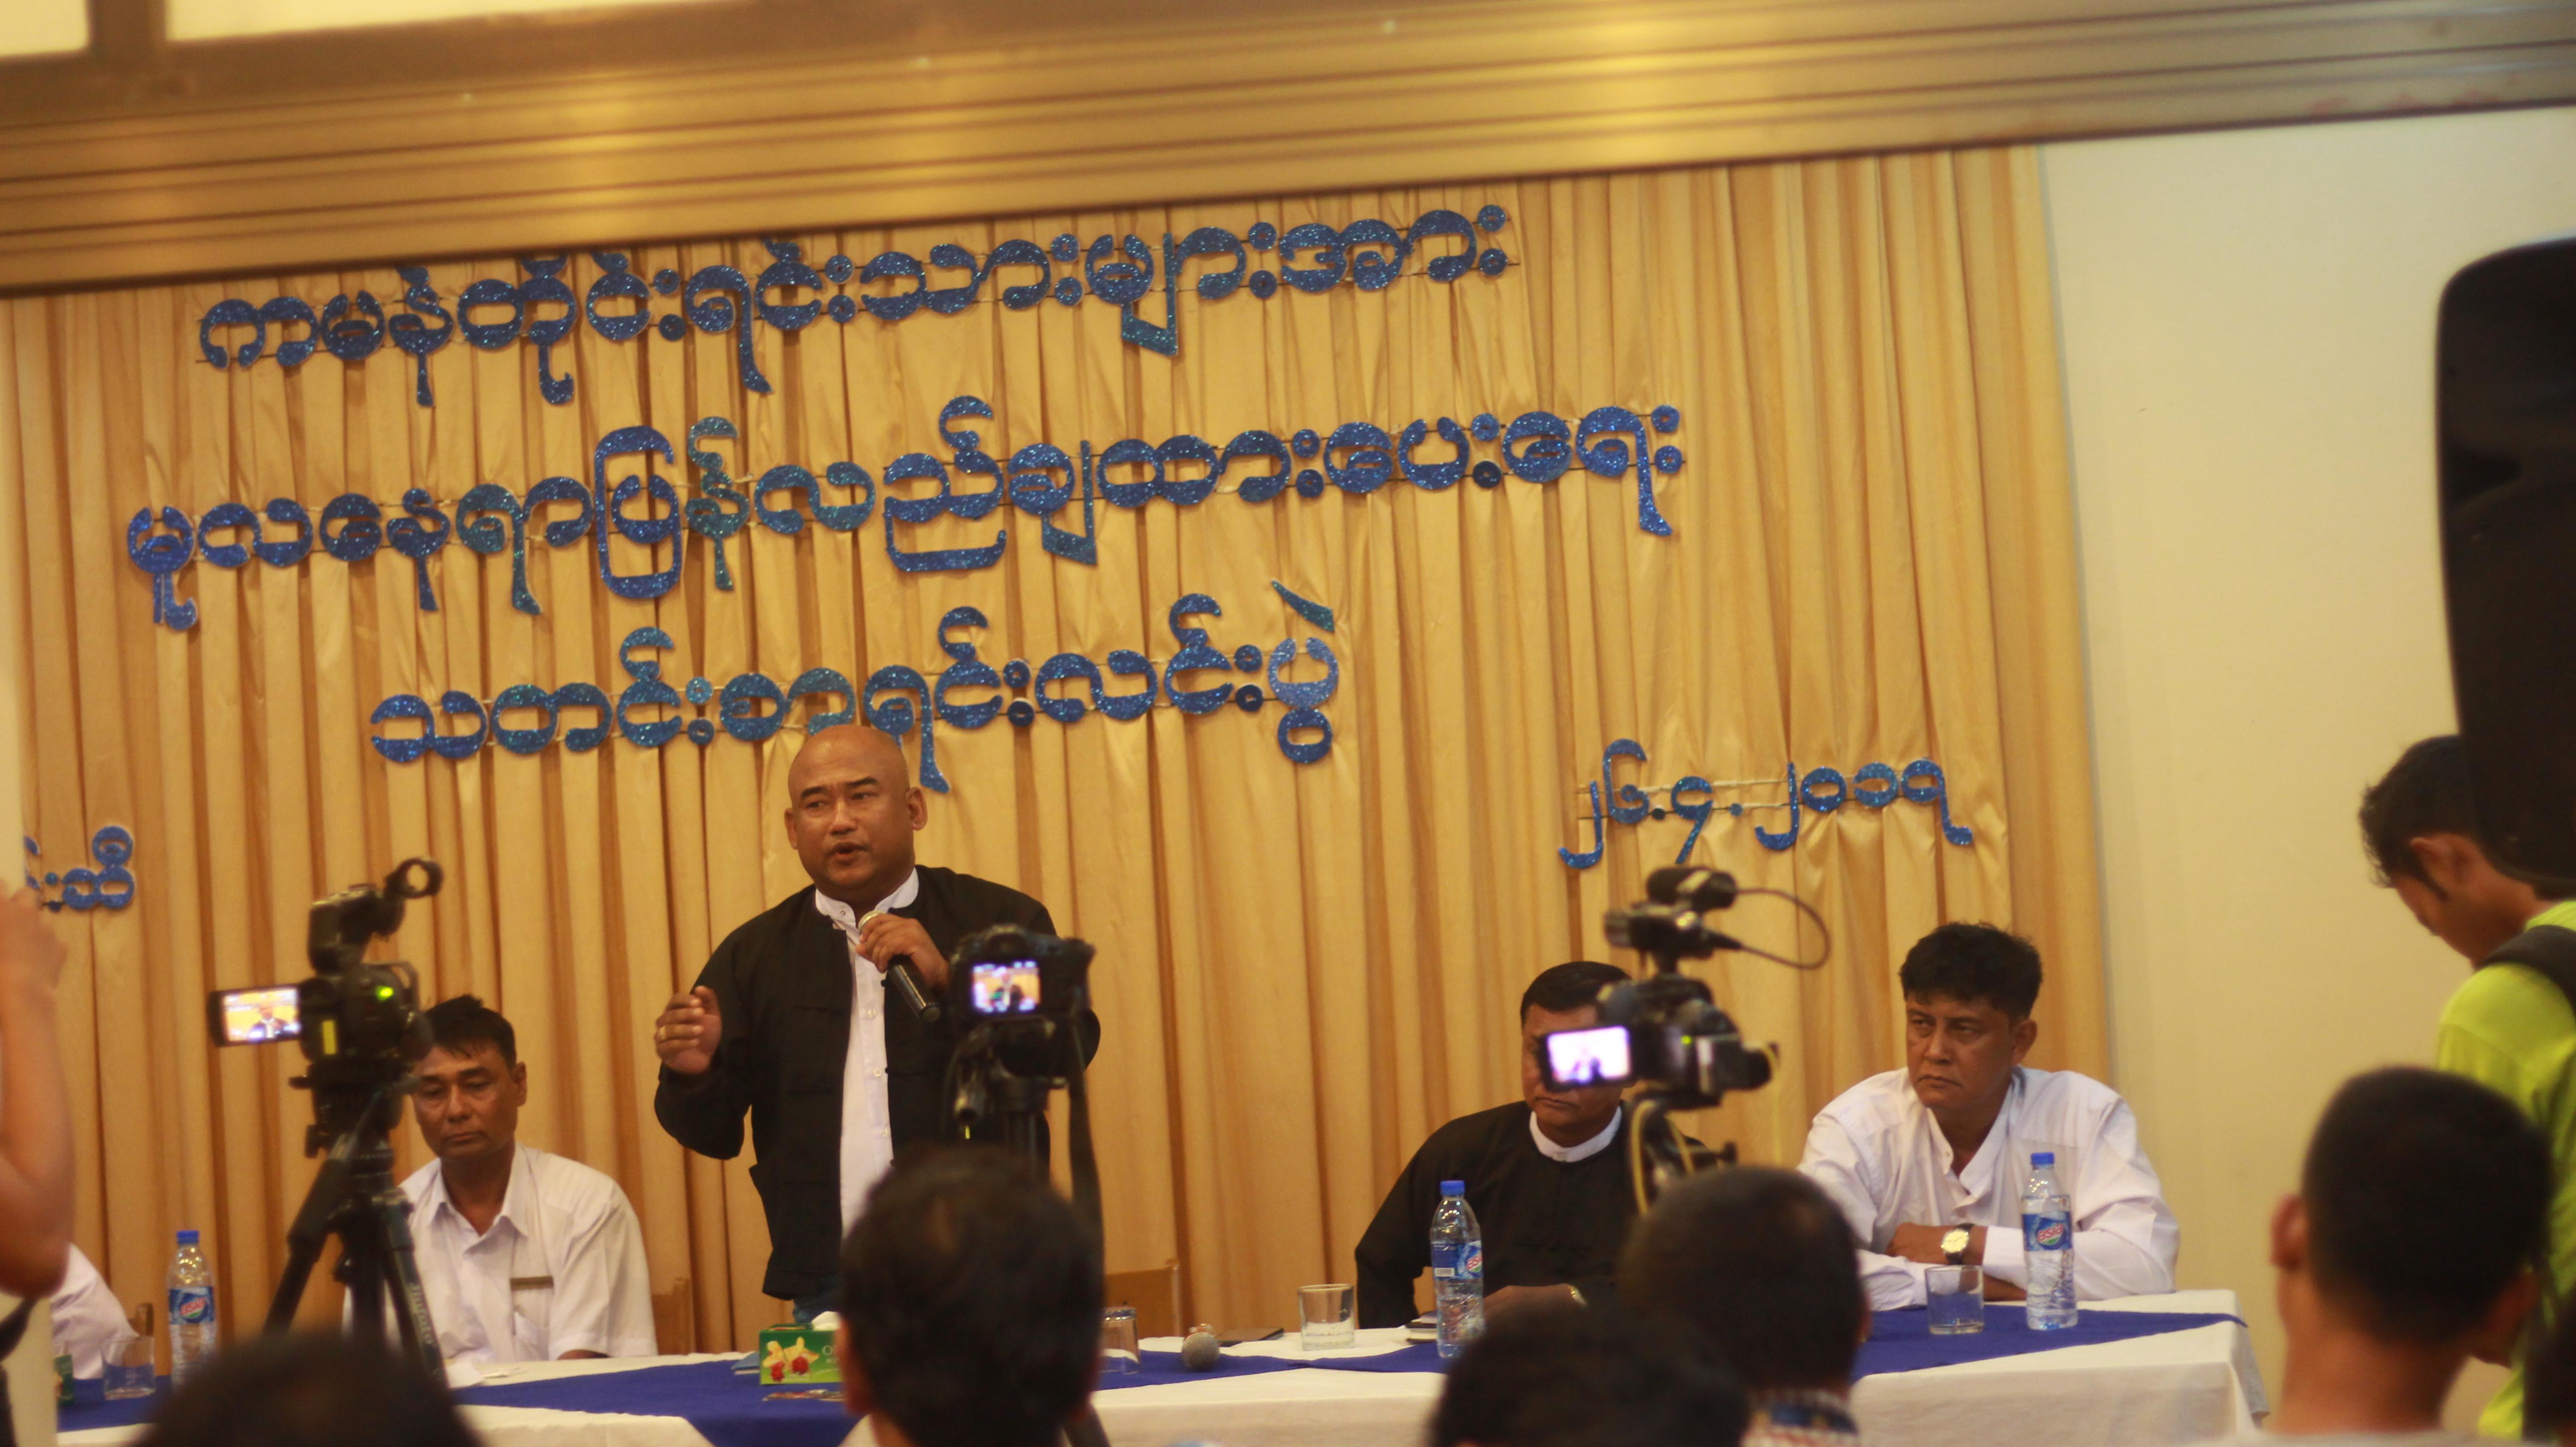 Kaman Muslims held a press conference at the Royal Rose restaurant in Yangon in late April. Photo: Phyo Thiha Cho / Myanmar Now